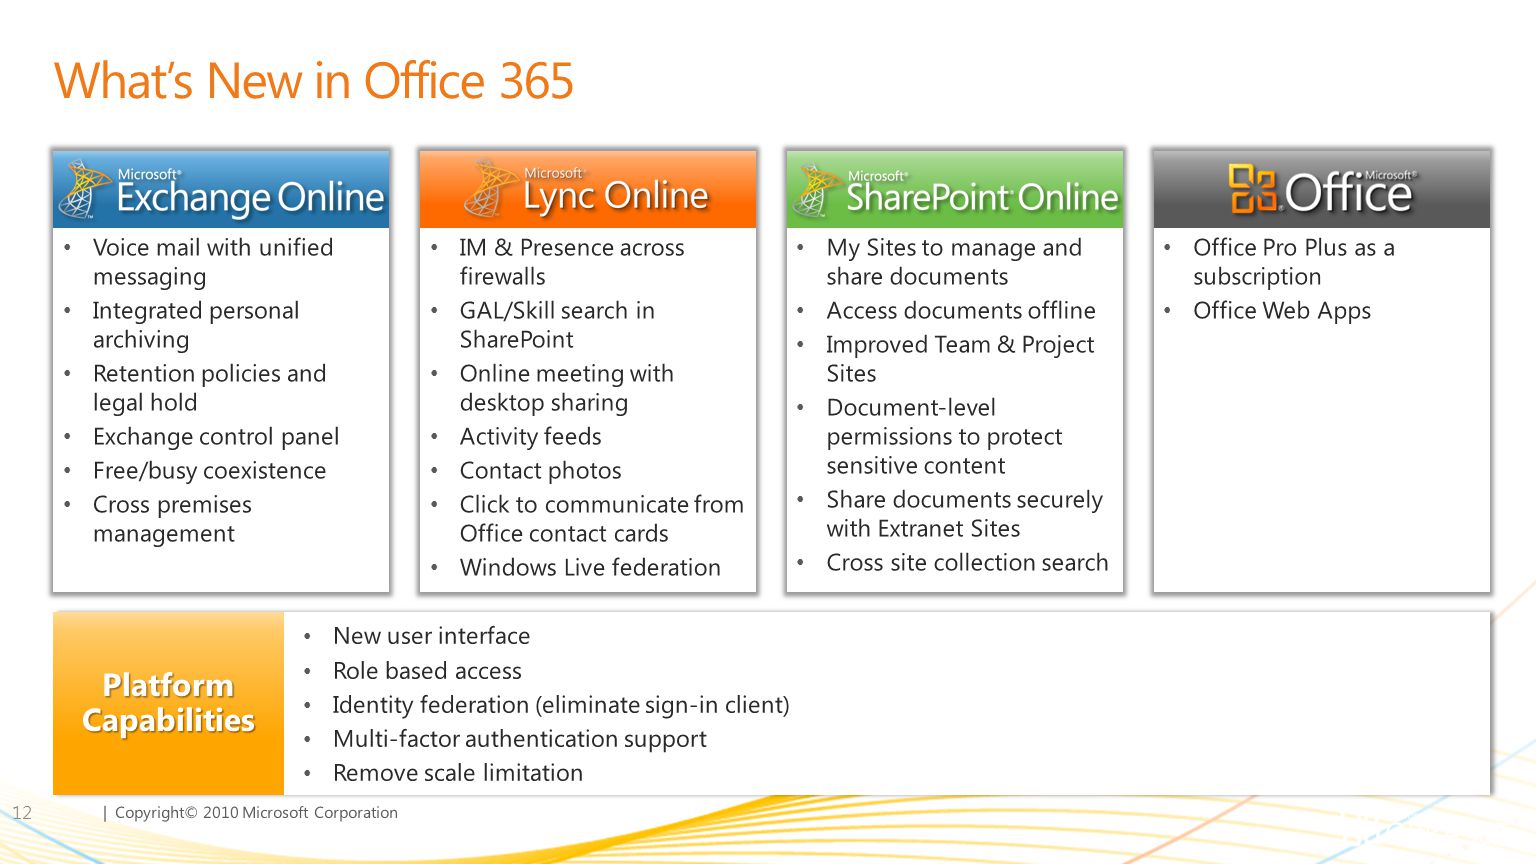 What’s New in Office 365 Platform Capabilities